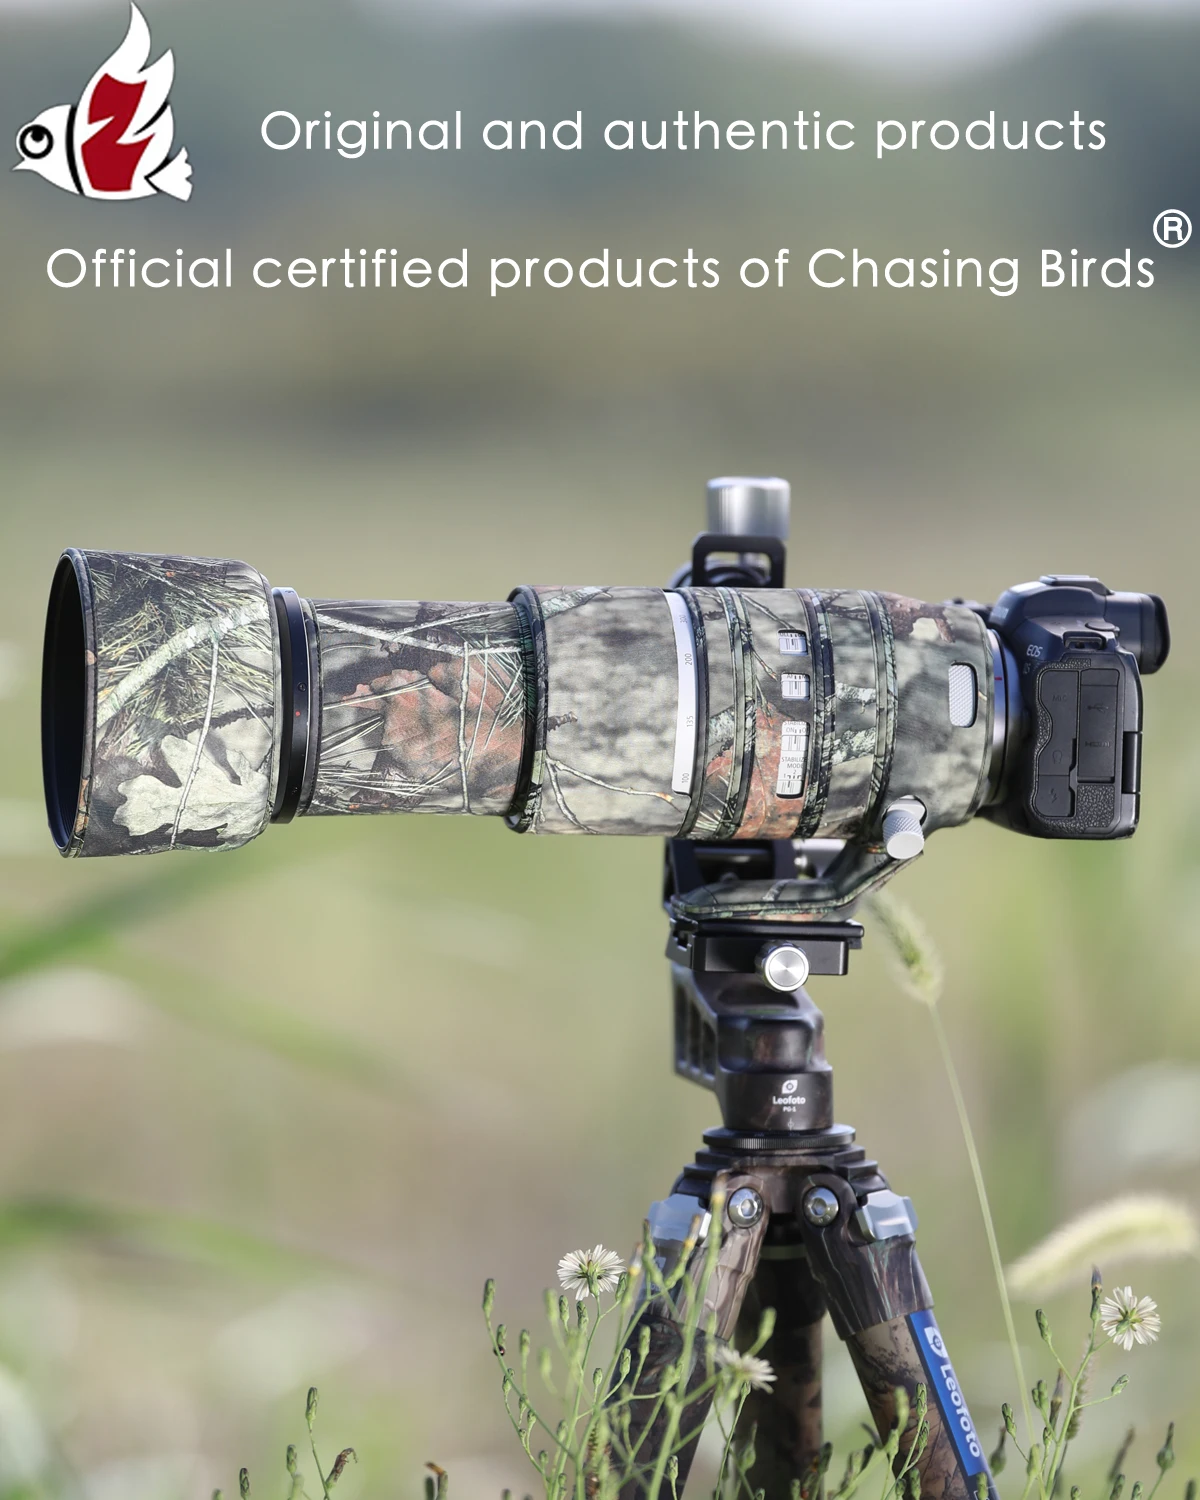 

CHASING BIRDS camouflage lens coat for CANON RF 100 500 mm F4.5-7.1 L IS USM waterproof and rainproof lens protective cover